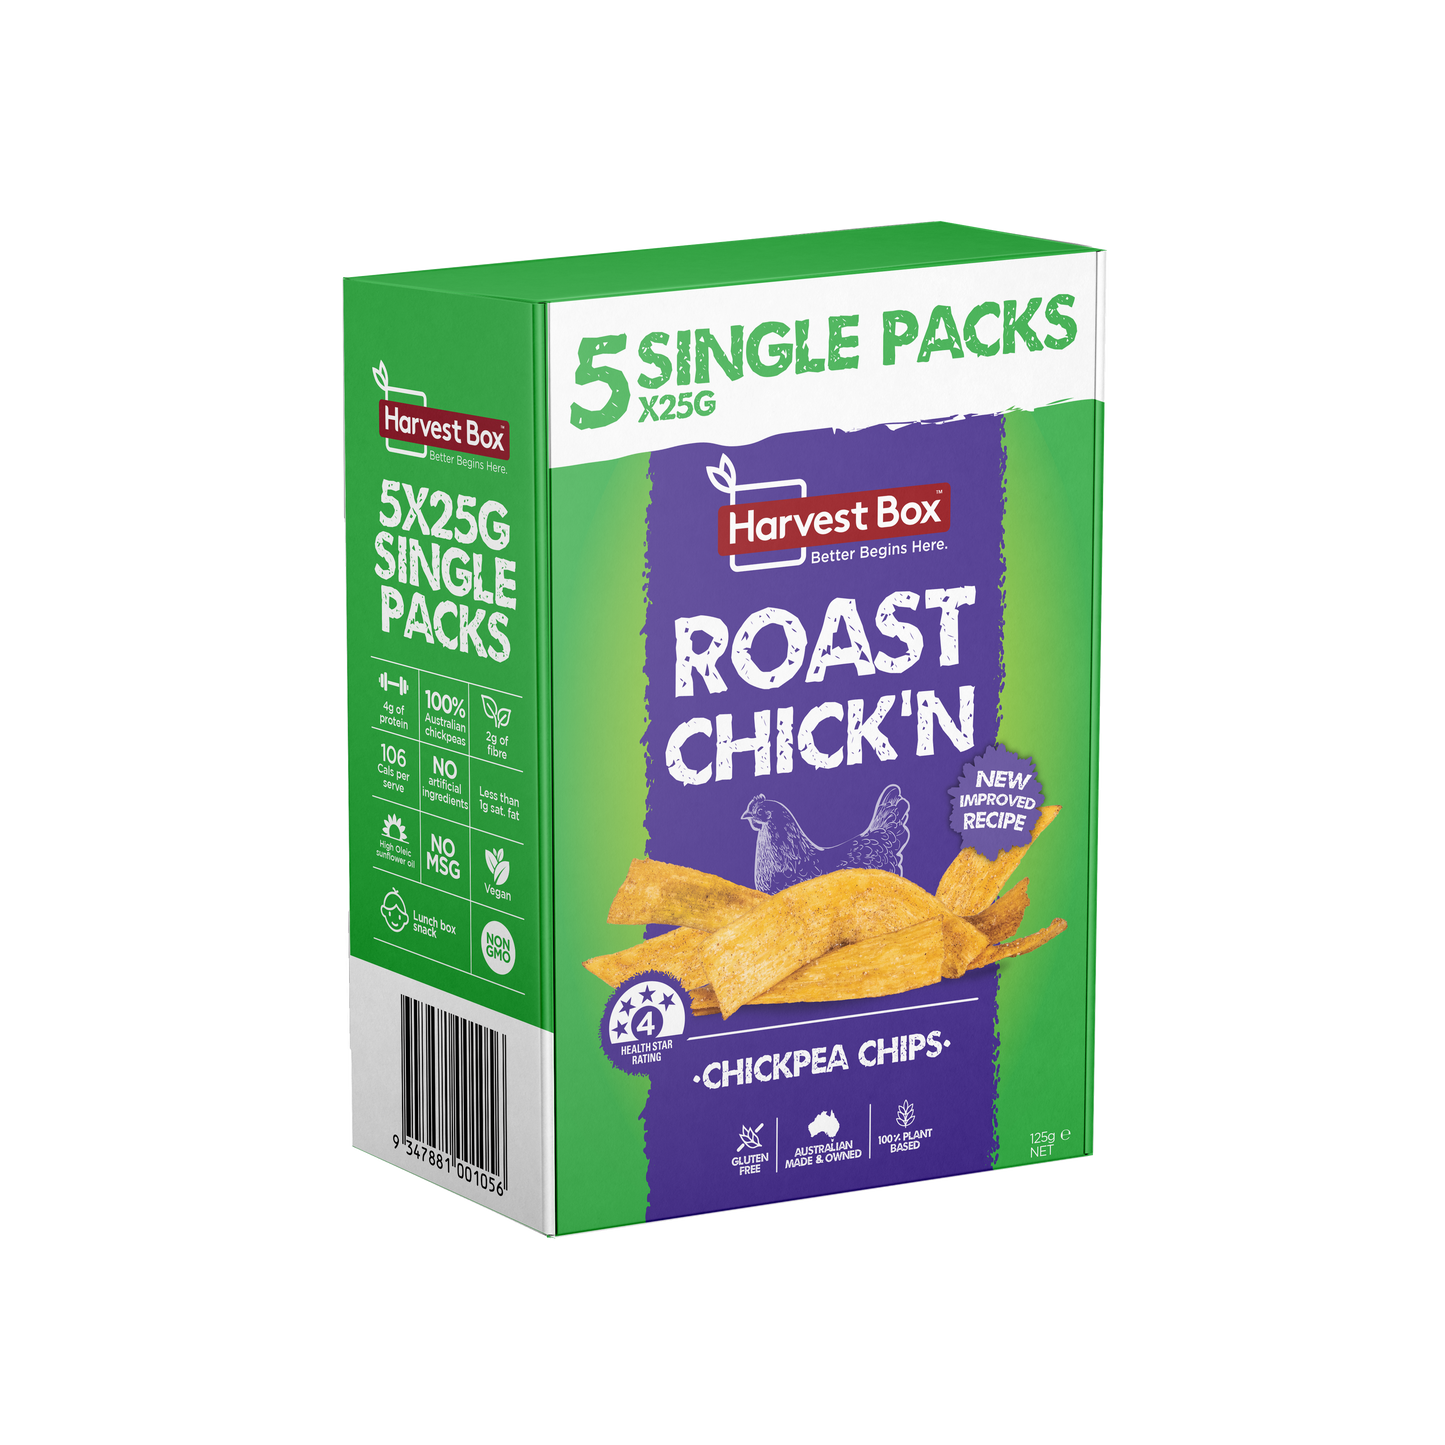 CHICKPEA CHIPS – ROAST CHICK’N (5x25g)